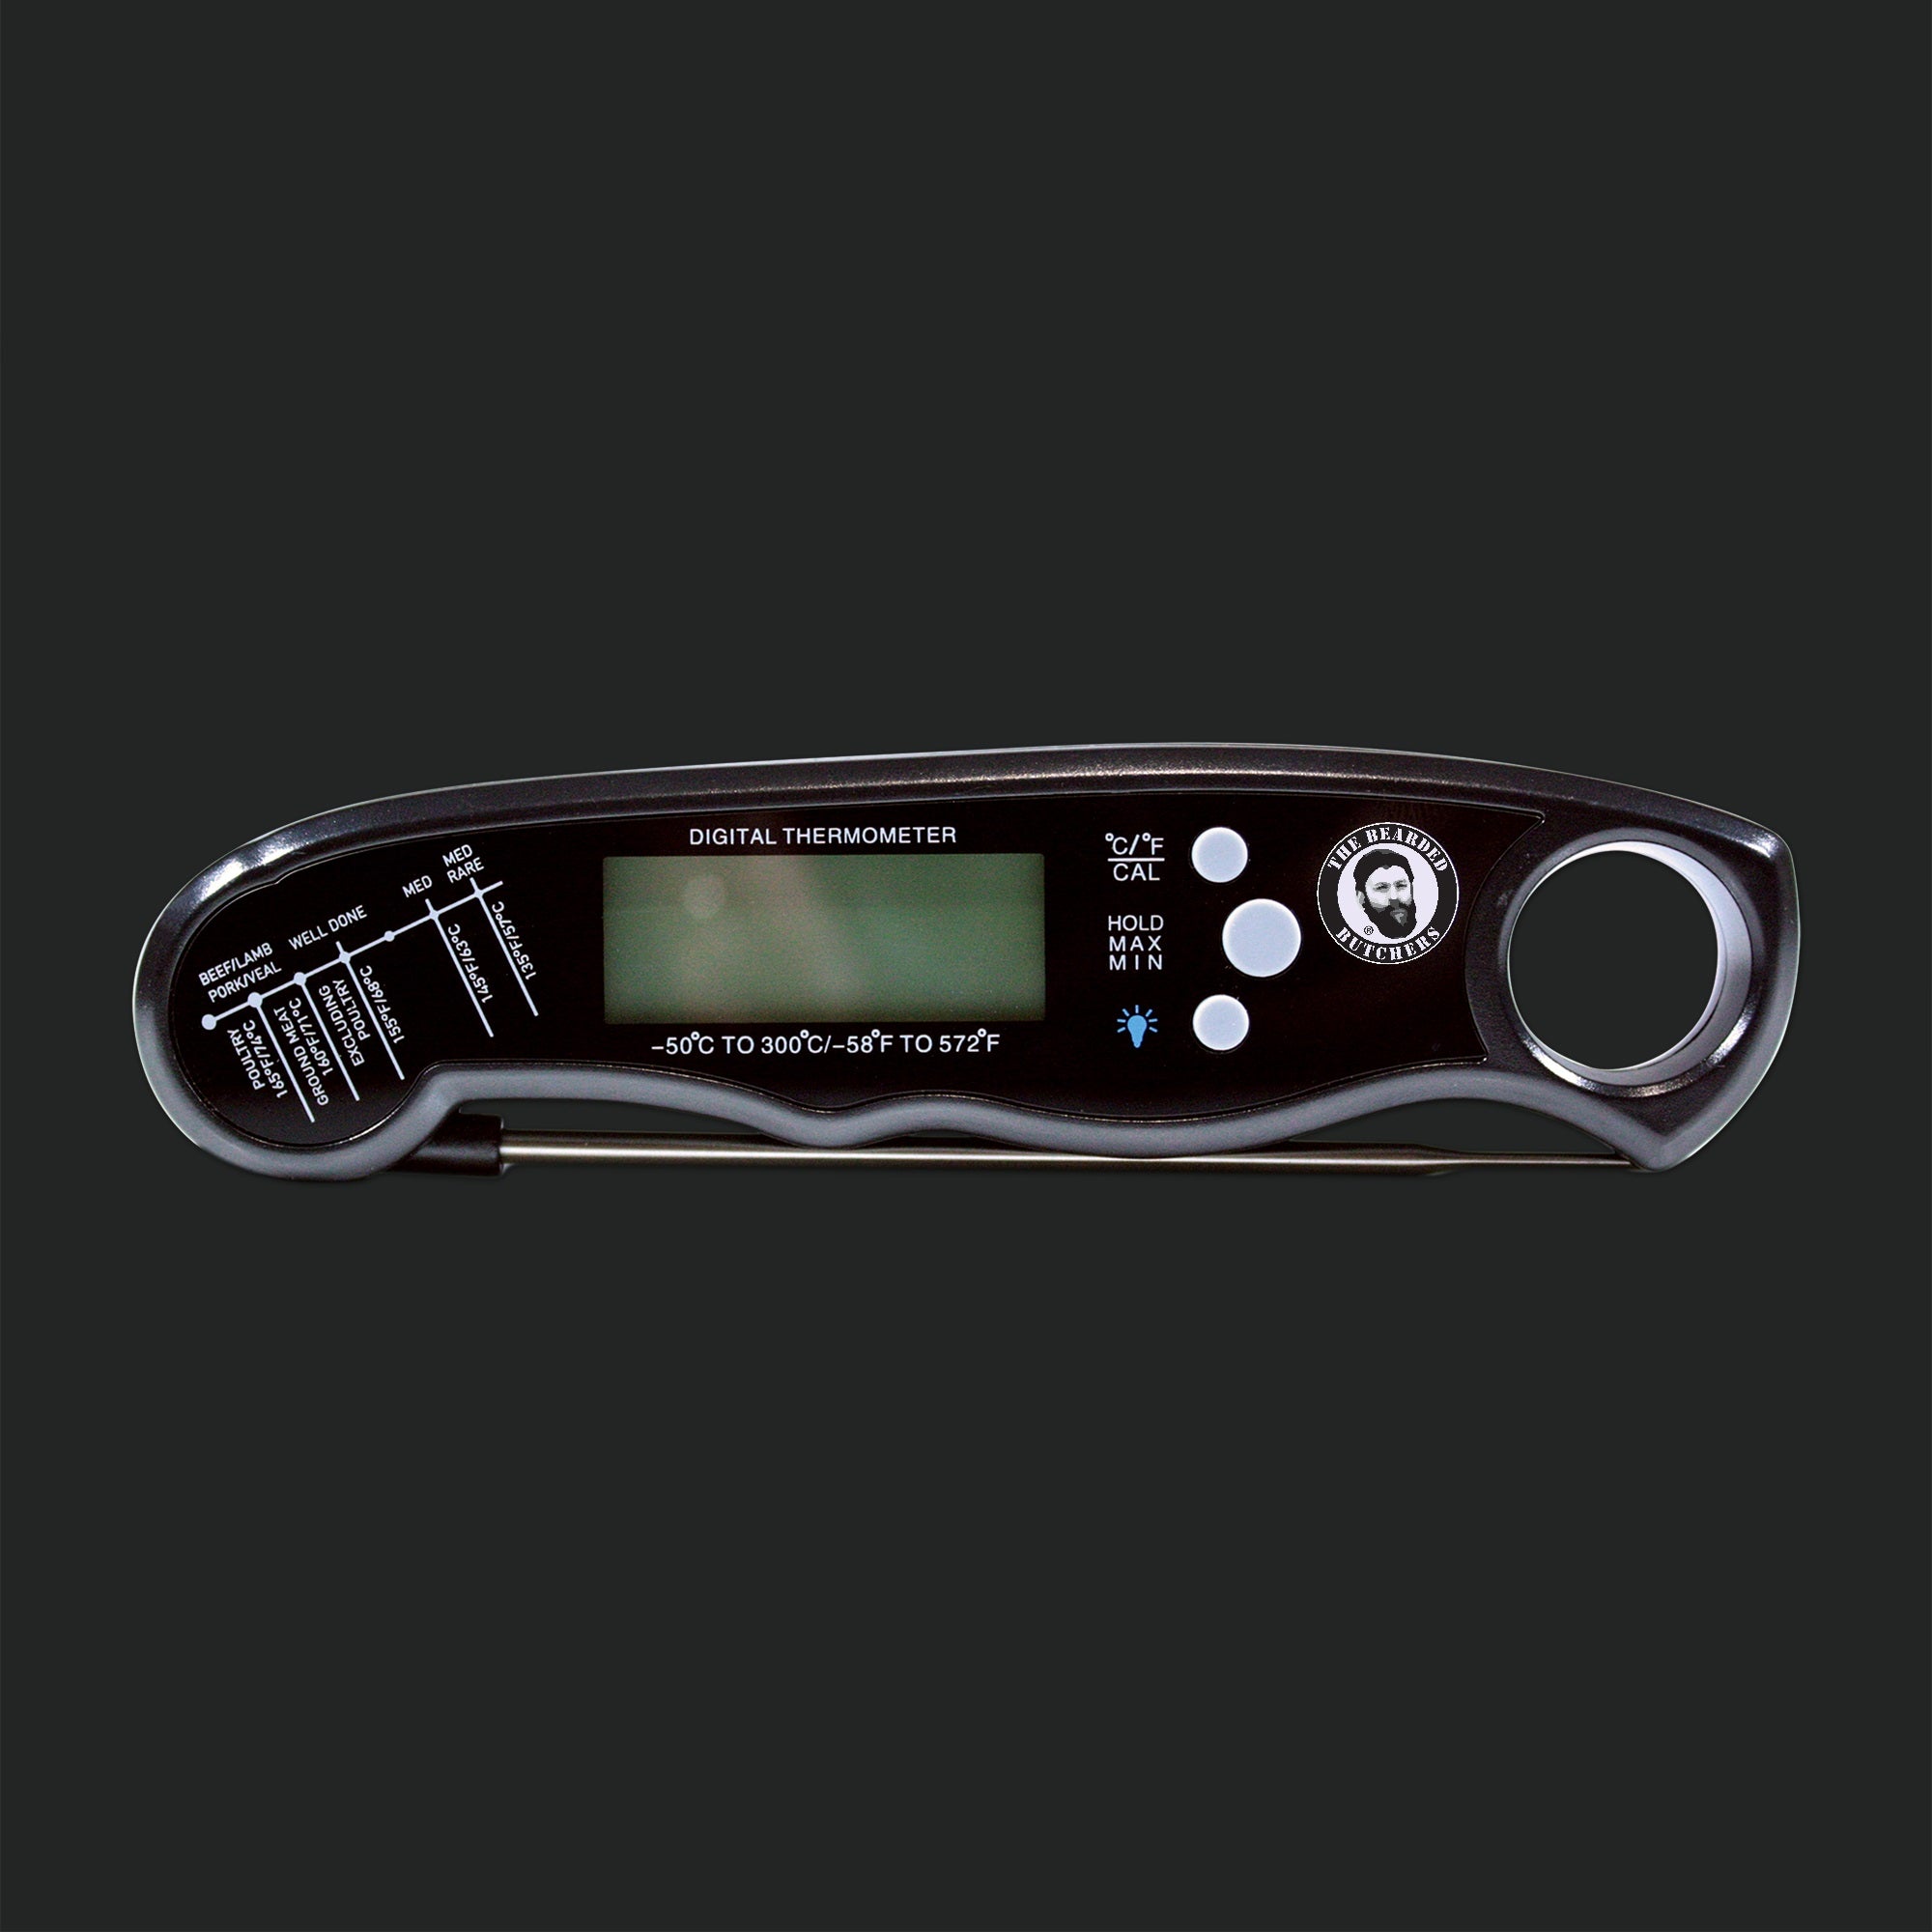 Snag This Digital Meat Thermometer While It's $25 at